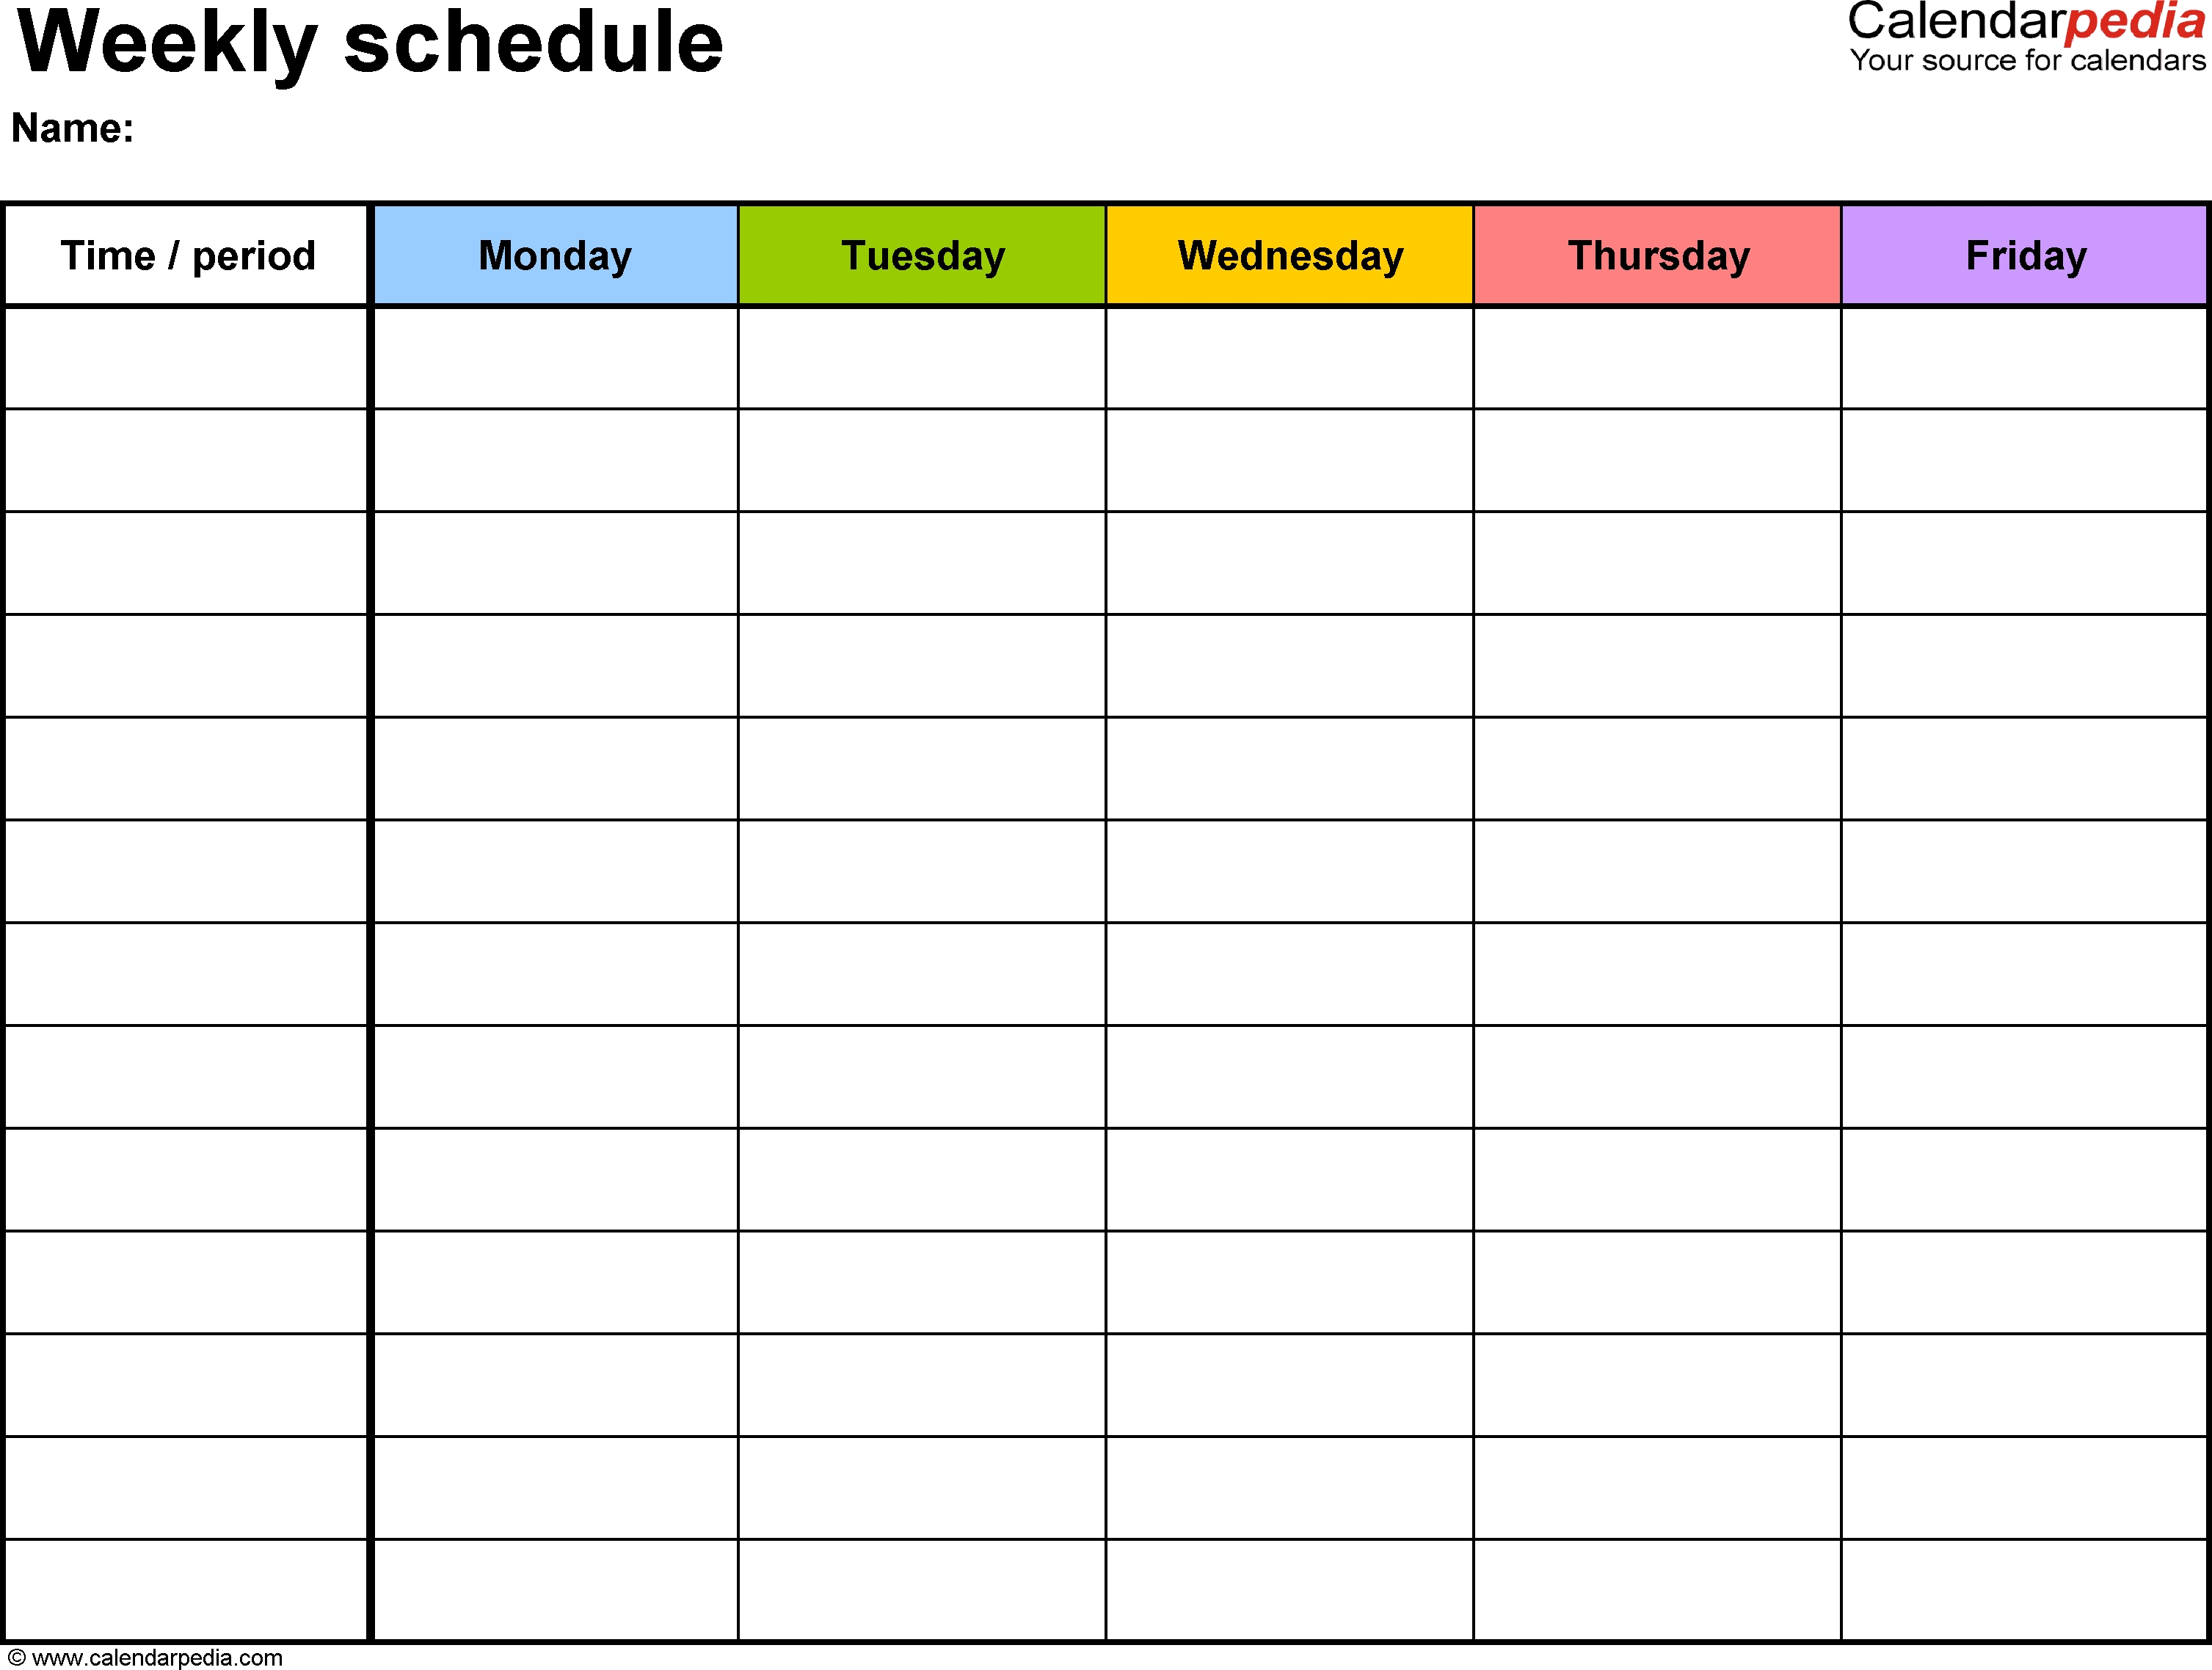 Free Weekly Schedule Templates For Word - 18 Templates throughout Monday To Friday Timetable Template